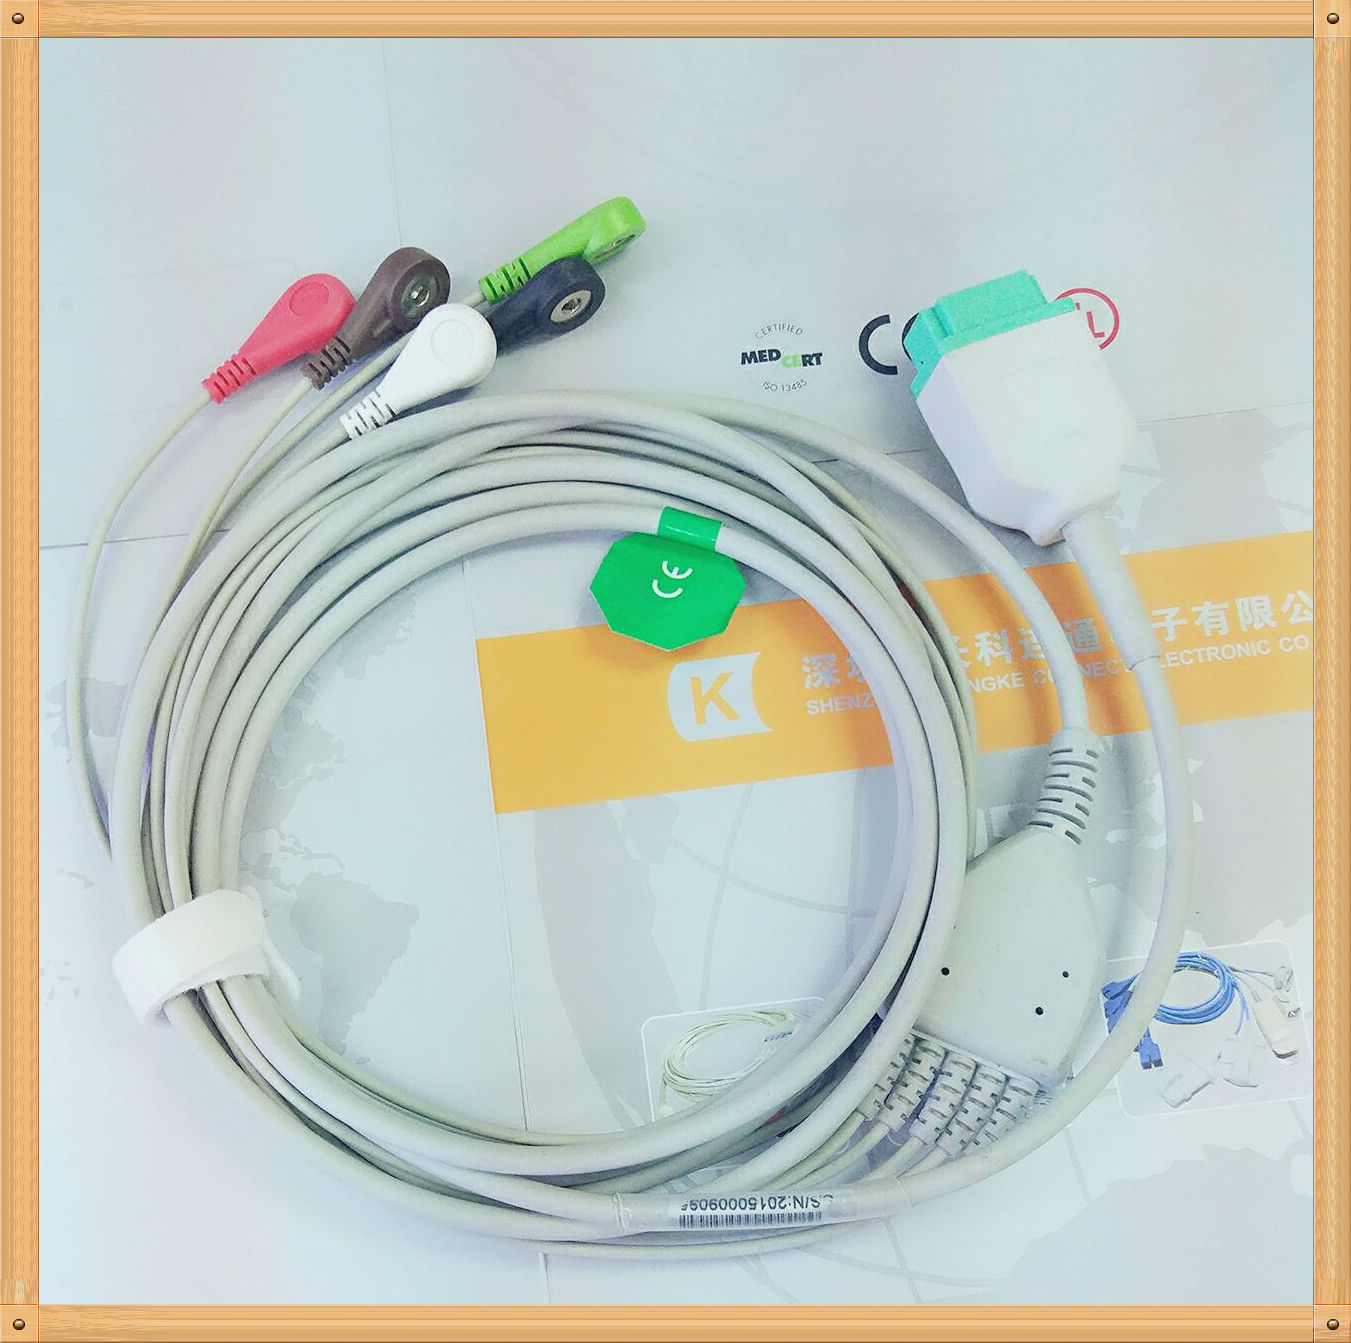 GE Marquette 11 Pin One Piece ECG Cable 5 Leads Snap AHA DIAGNOSTIC ULTRASOUND MACHINES FOR SALE